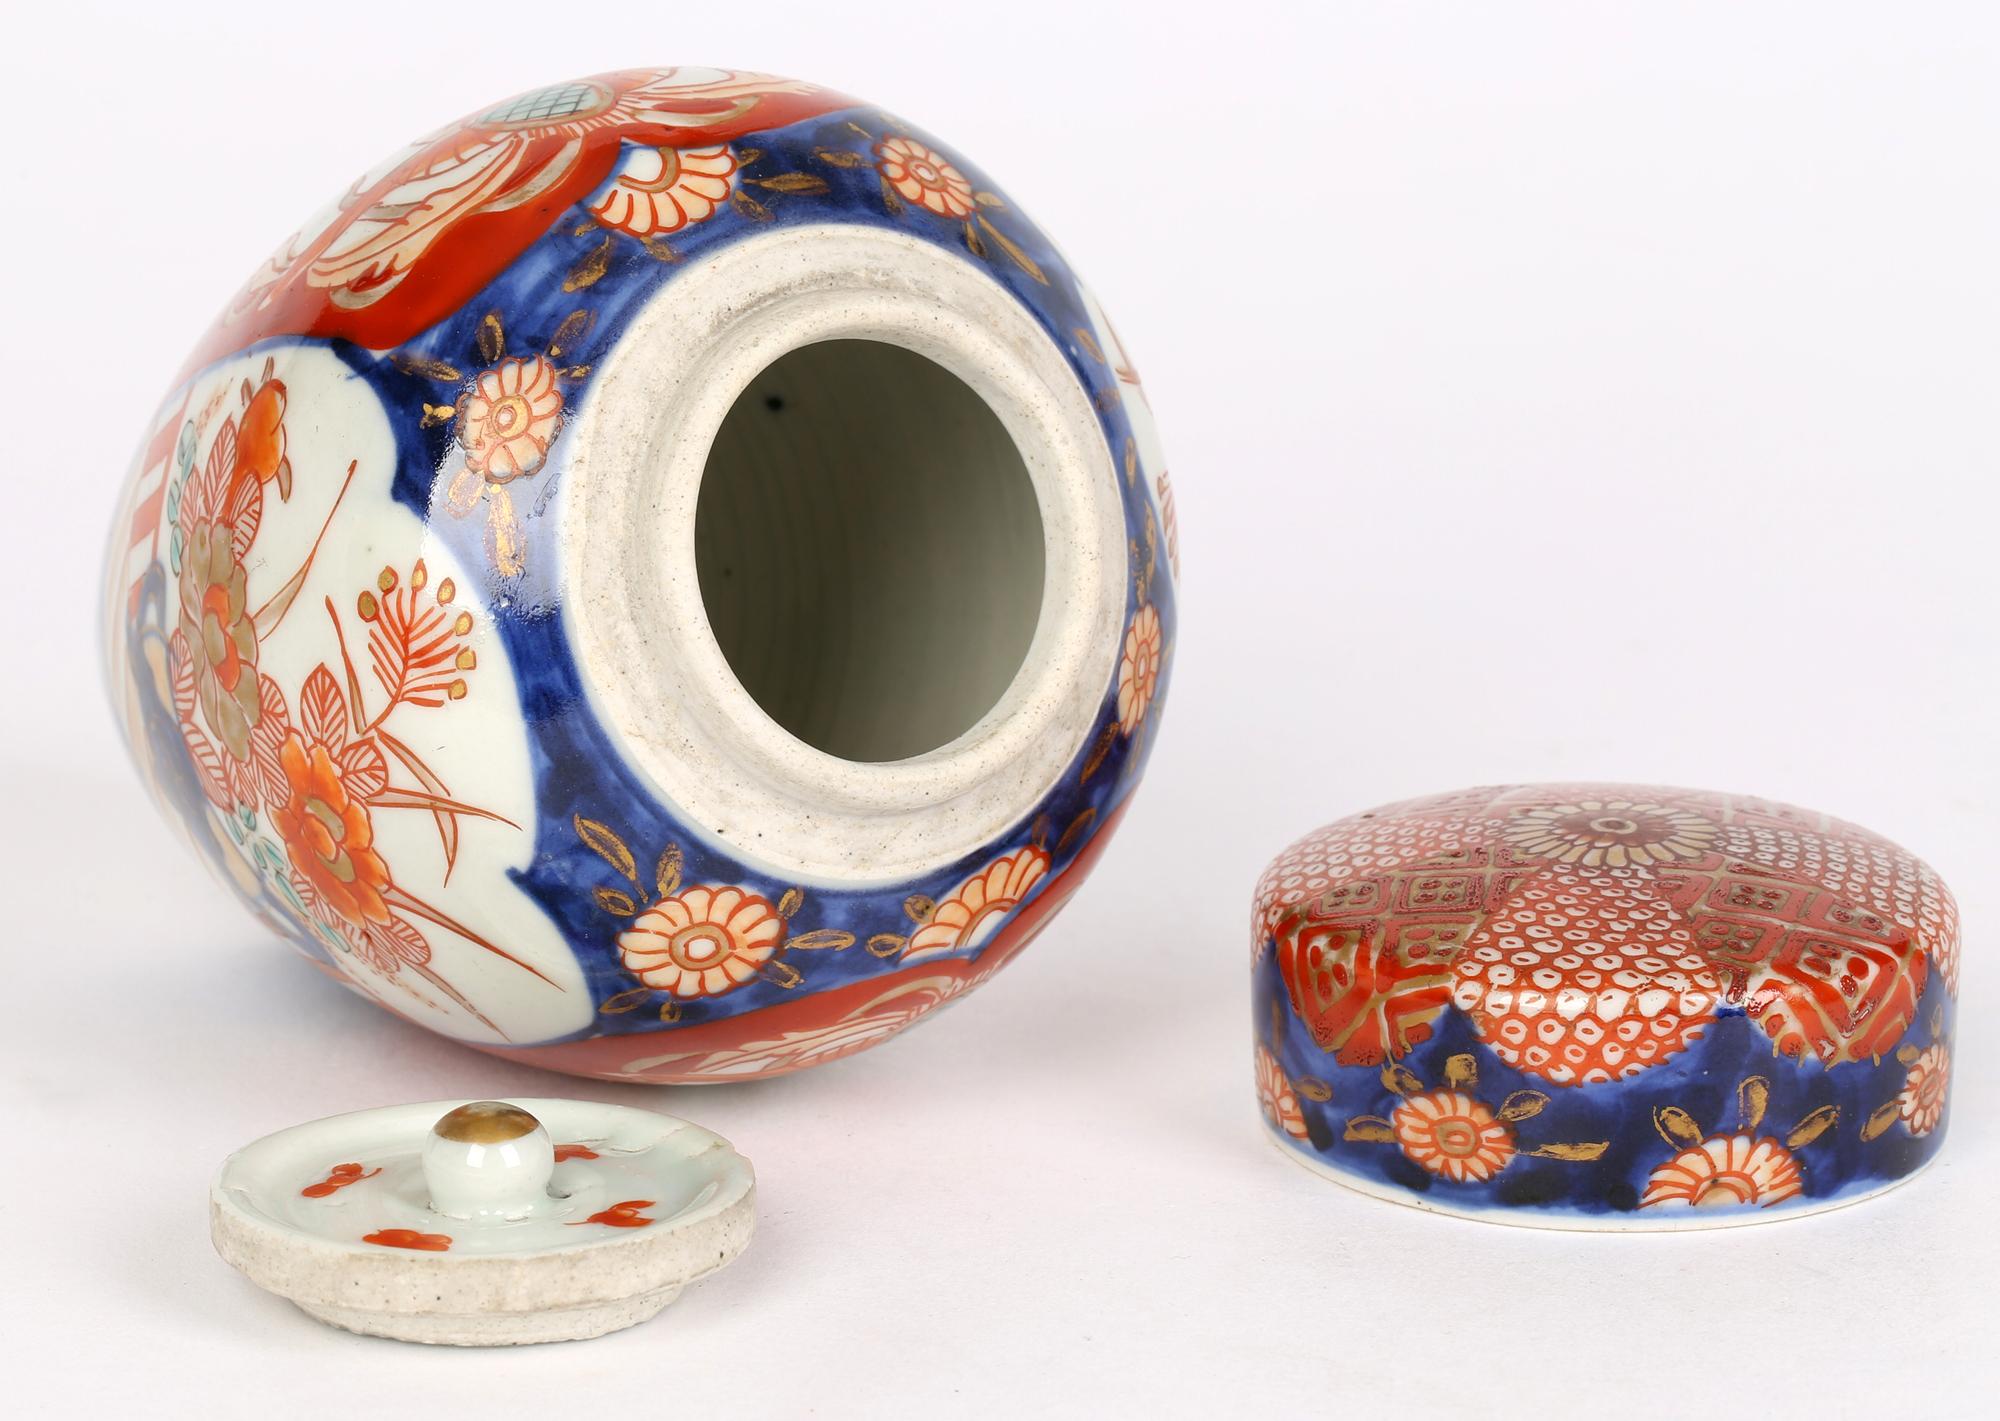 Japanese Meiji Imari Hand Painted Porcelain Lidded Tea Caddy with Stand 14